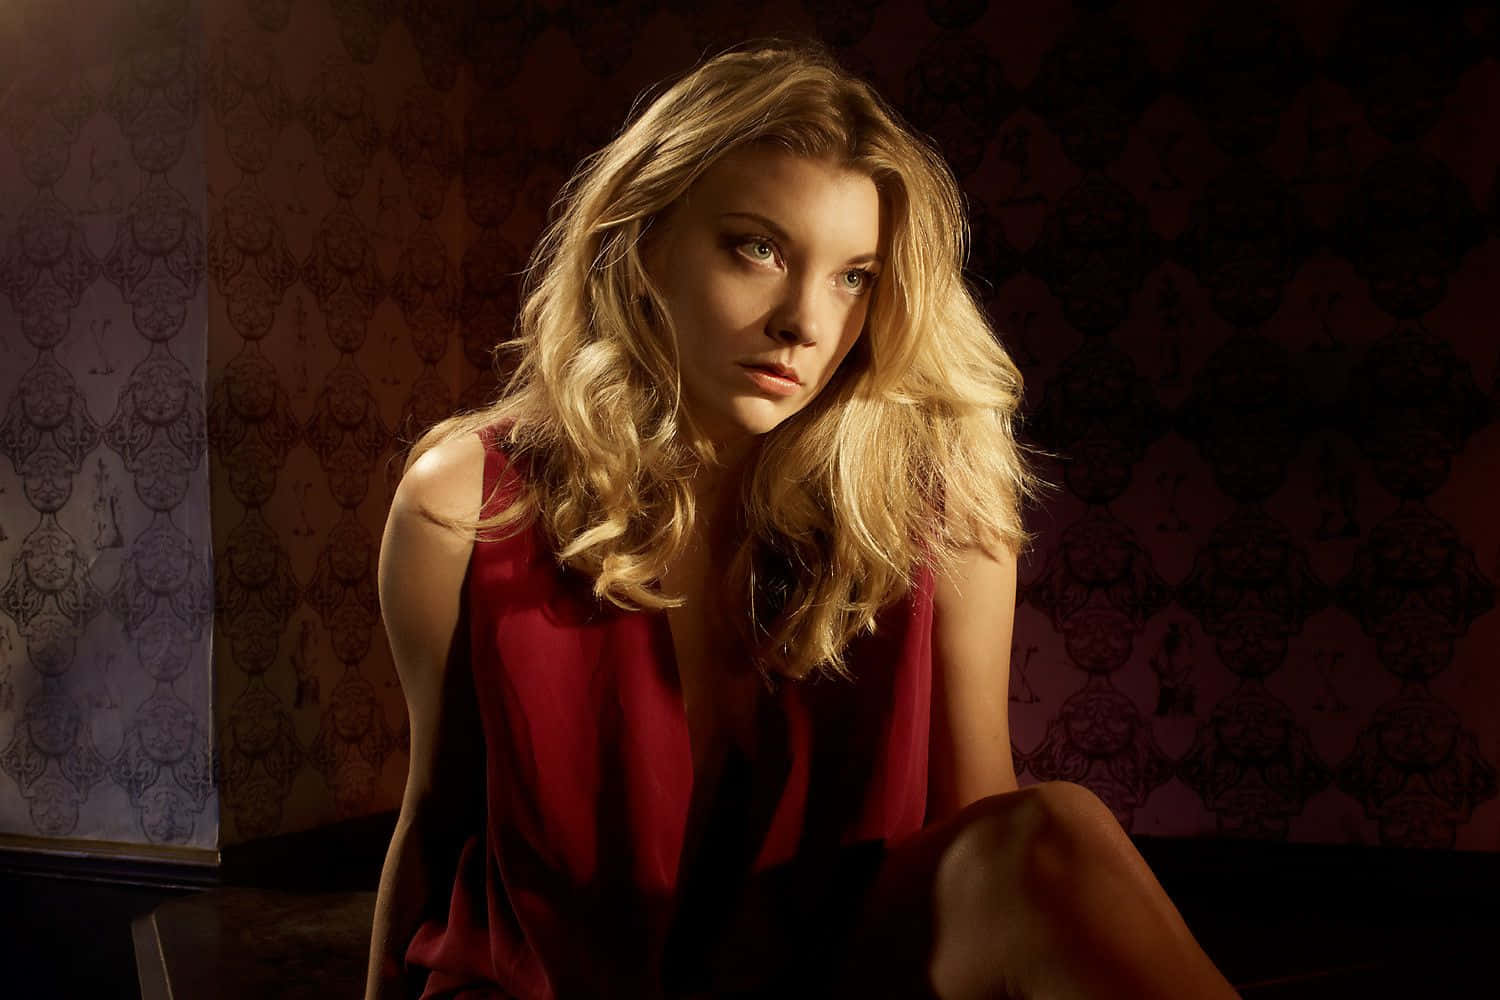 A stunning portrait of Natalie Dormer with a captivating smile Wallpaper